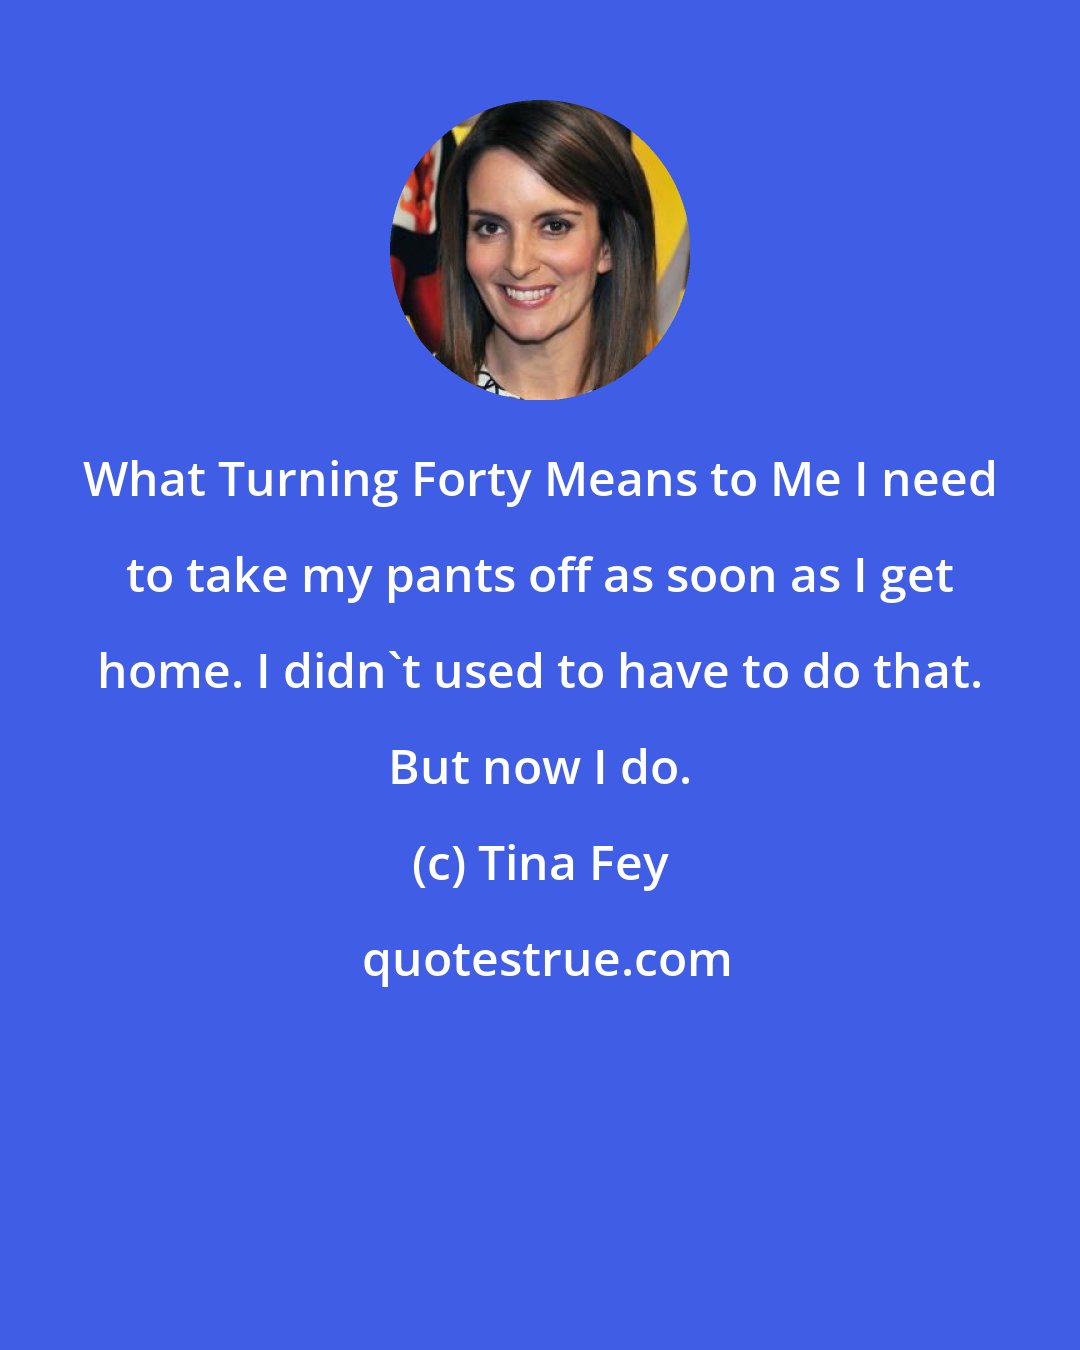 Tina Fey: What Turning Forty Means to Me I need to take my pants off as soon as I get home. I didn't used to have to do that. But now I do.